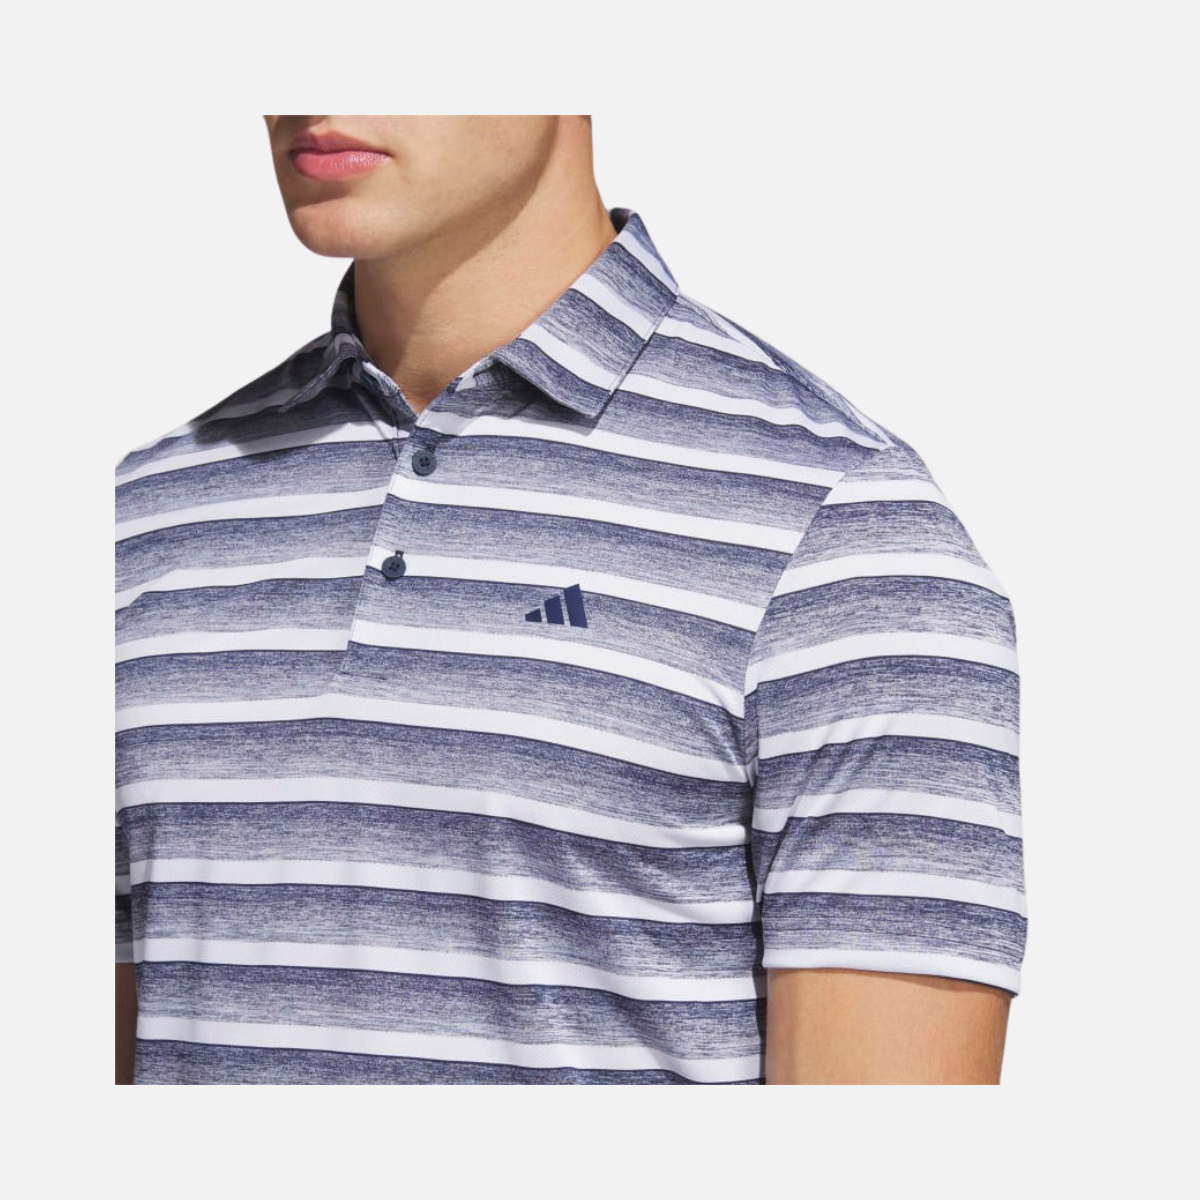 Adidas Two-Color Striped Polo Shirt -Collegiate Navy/White